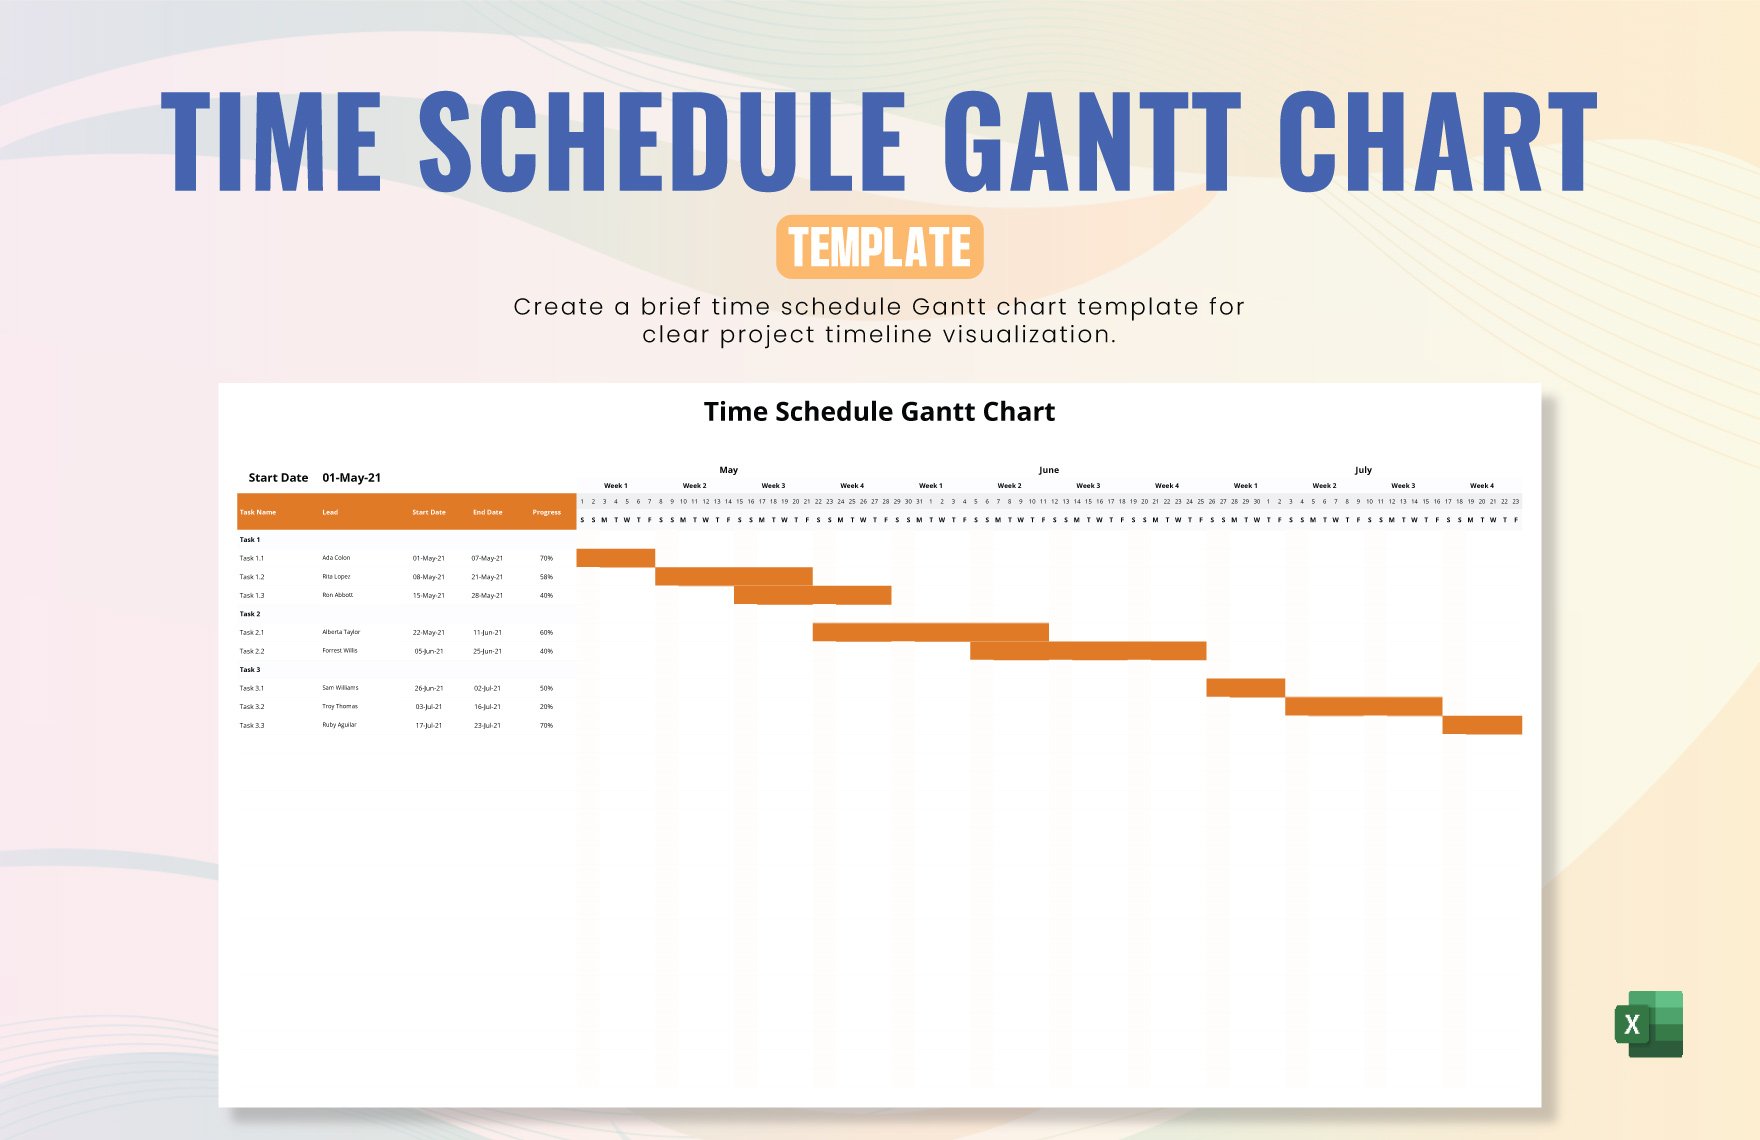 Time Schedule Gantt Chart Template in Excel